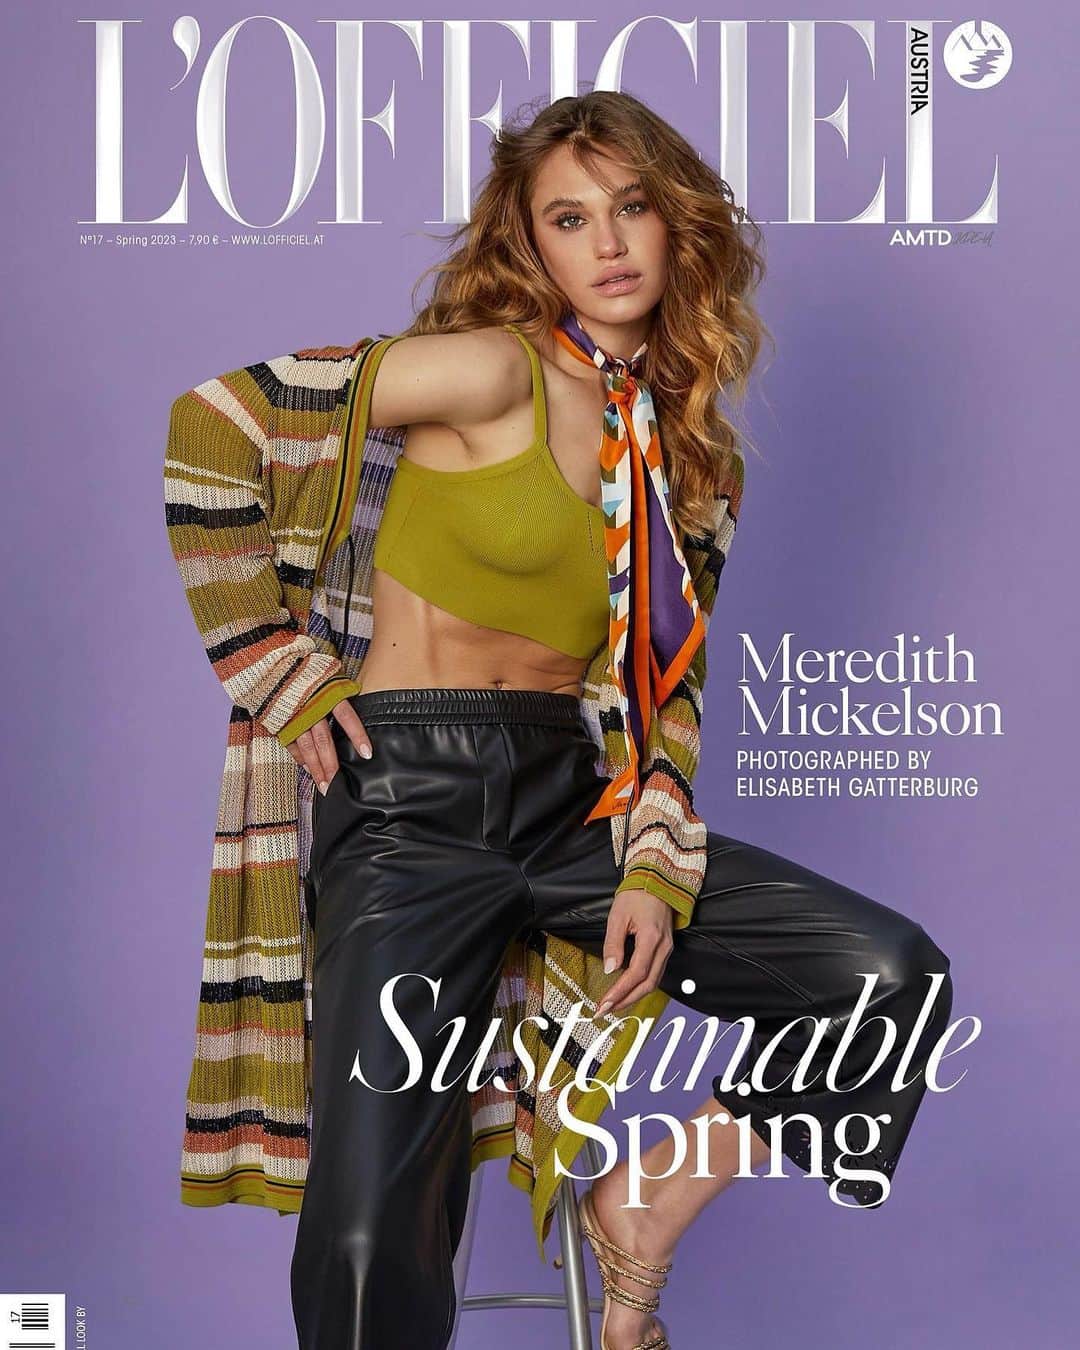 MEREDITH MICKELSONのインスタグラム：「ah!!!!! its out🥹 So beyond thrilled to share this cover and to of worked with such an extraordinarily talented team in the most beautiful place, Vienna❤️  @lofficielaustria proudly presents The Sustainability Issues!  Photographer: @elisabethggatterburg Styling: @miopaternoss Styling assistant: @iamsaborka MUA: @nieves_elorduy Production: @anna.znamensky full look by @marccain Agency: @bornmodels.dk  Manager: @rhisharp」